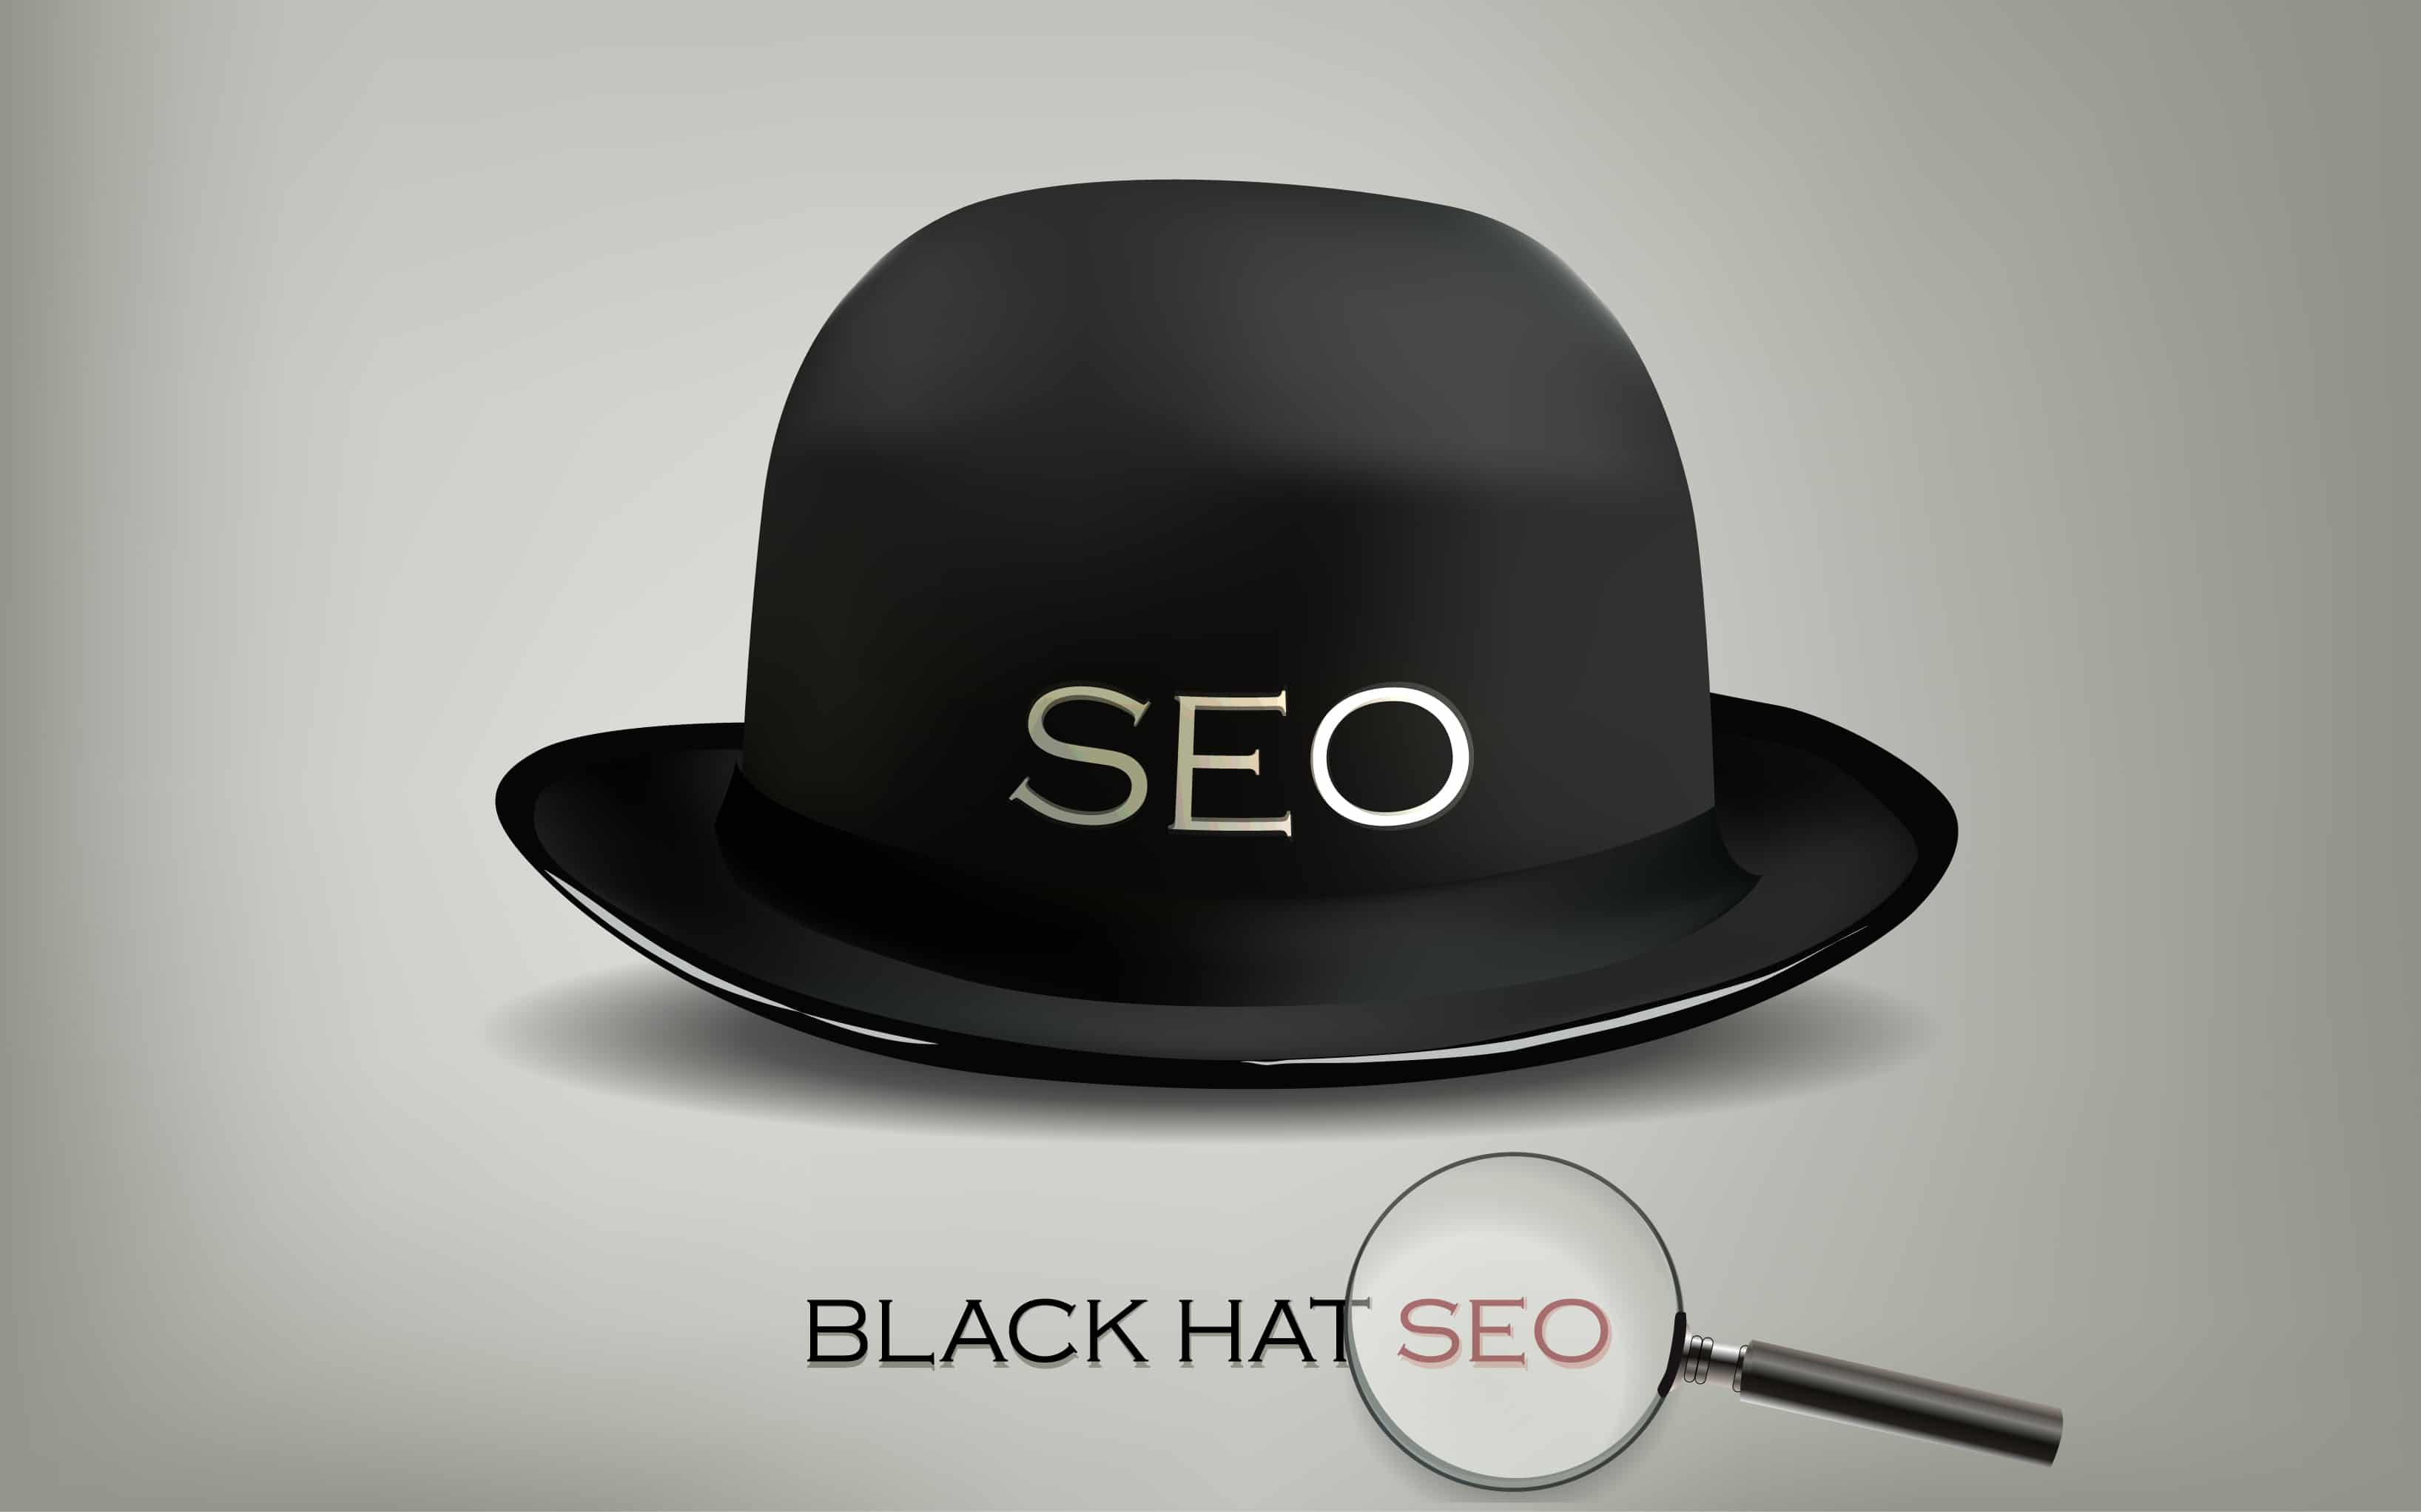 Black Hat SEO - Why You Should Avoid It?